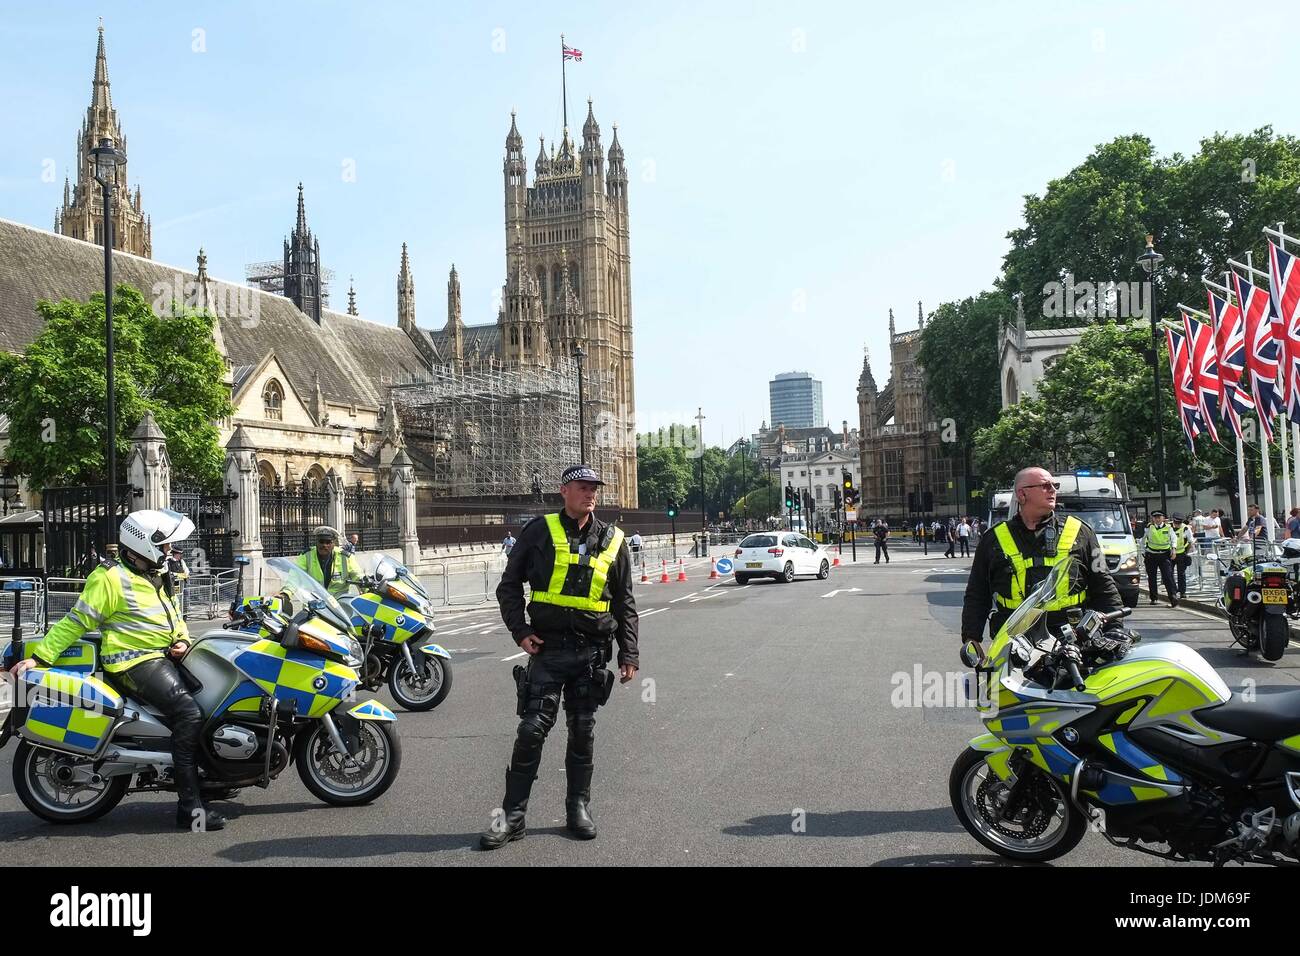 London, UK. 21st June, 2017. Police line at Parliament Square.Day of Rage protesters march from Shepards Bush to Parliament demanding justice for the victims of the Grenfell Tower fire and Theresa Mays resignation. :Credit claire doherty Alamy/Live News. Stock Photo